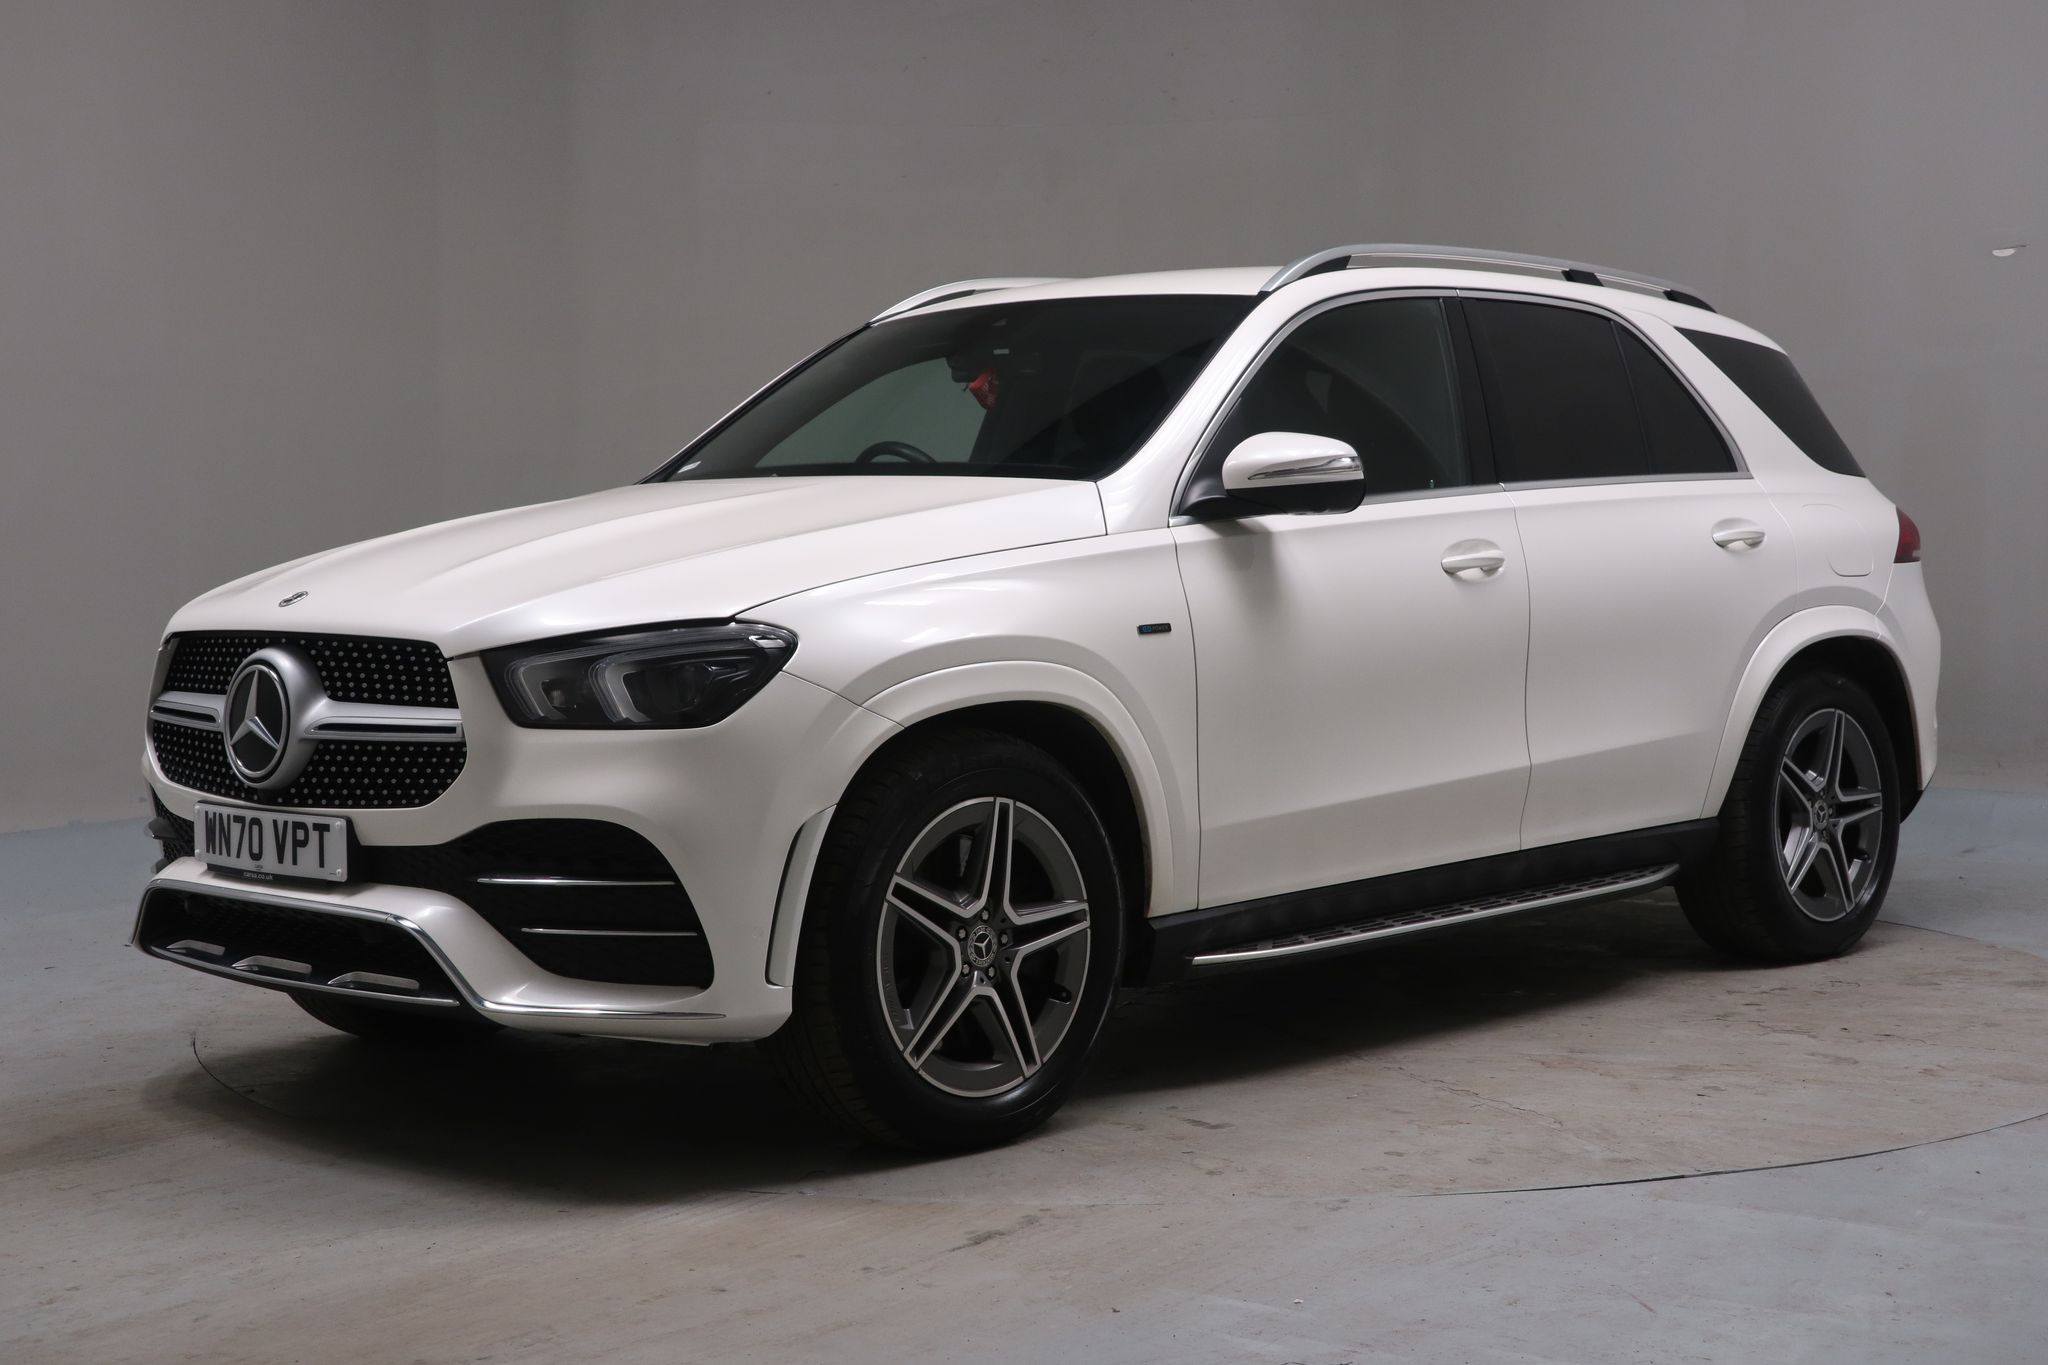 2020 used Mercedes-Benz Gle Class 2.0 GLE350de 31.2kWh AMG Line (Premium) Plug-in G-Tronic 4MATIC (320 ps)